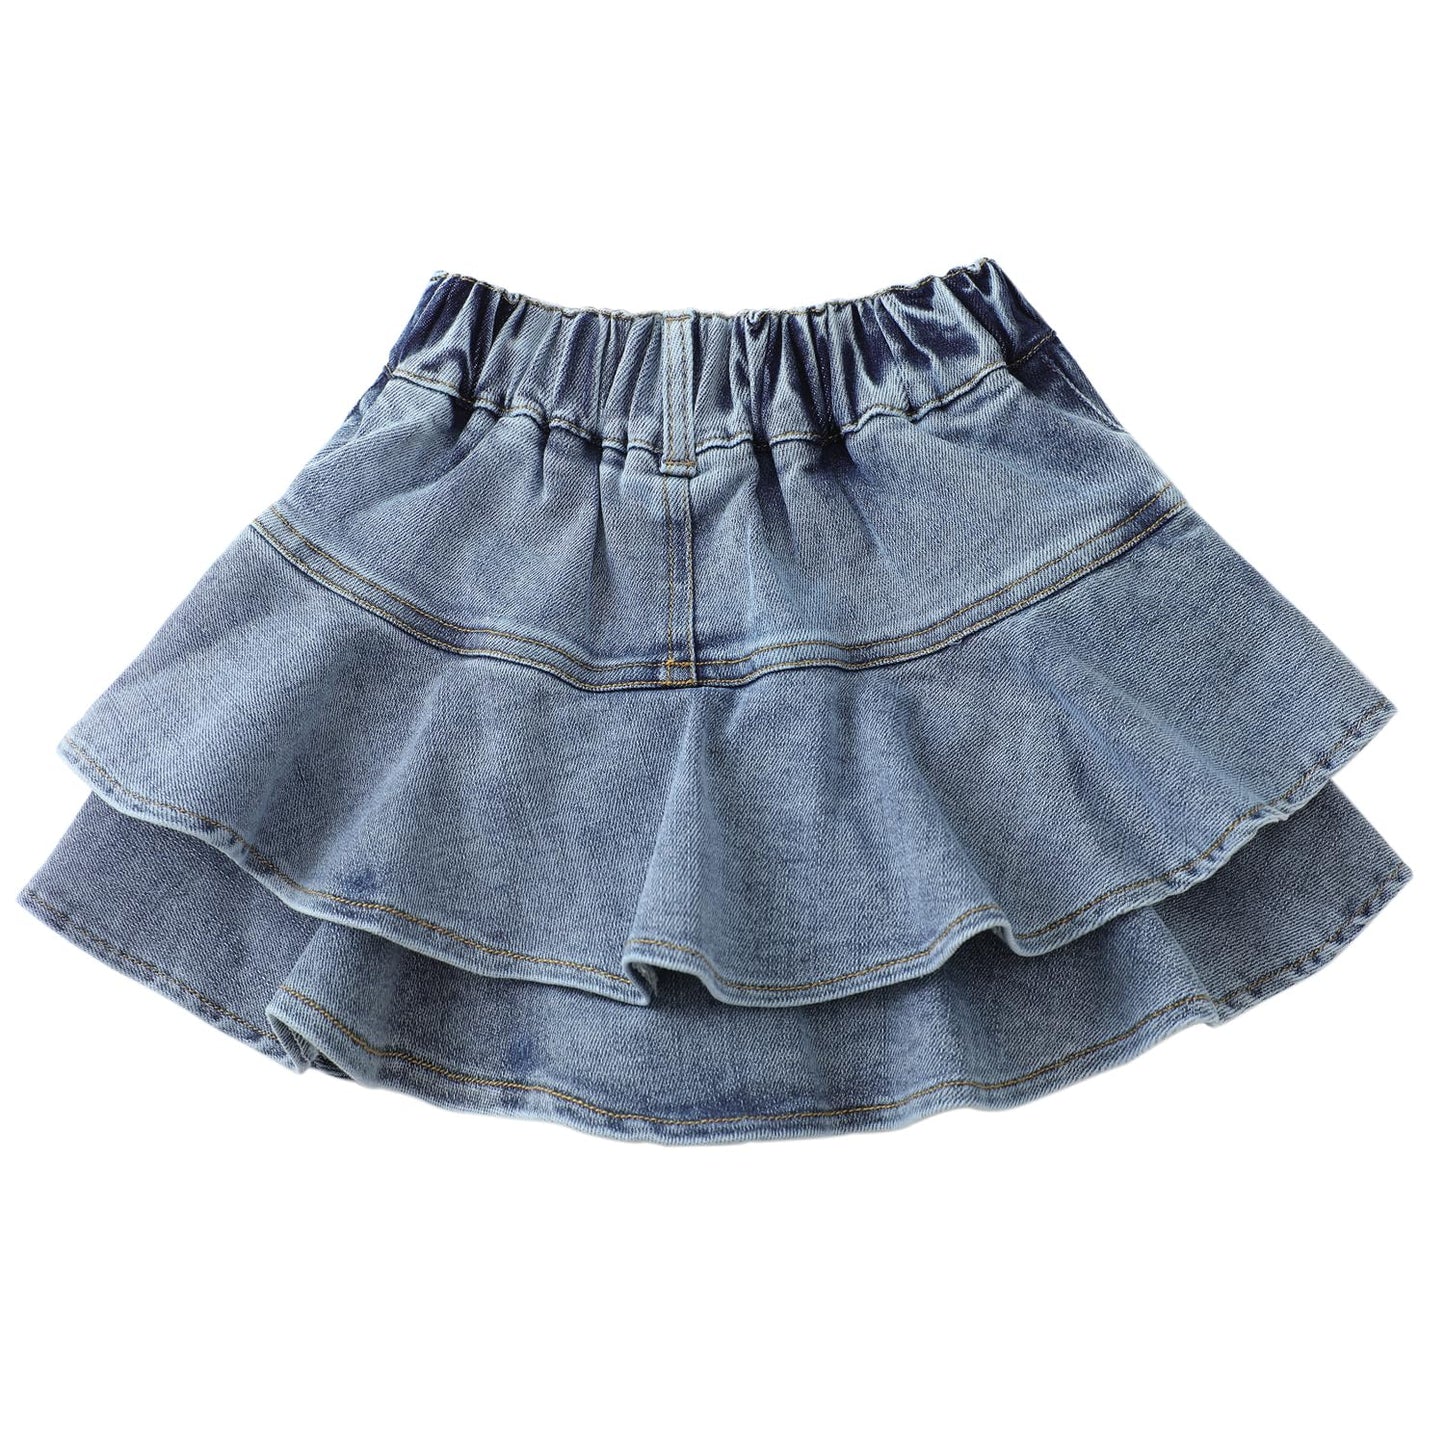 Flofallzique Little Girl Denim Skirts Mini Flared Layers Pleated Skirts for Toddlers Skorts 3 Years